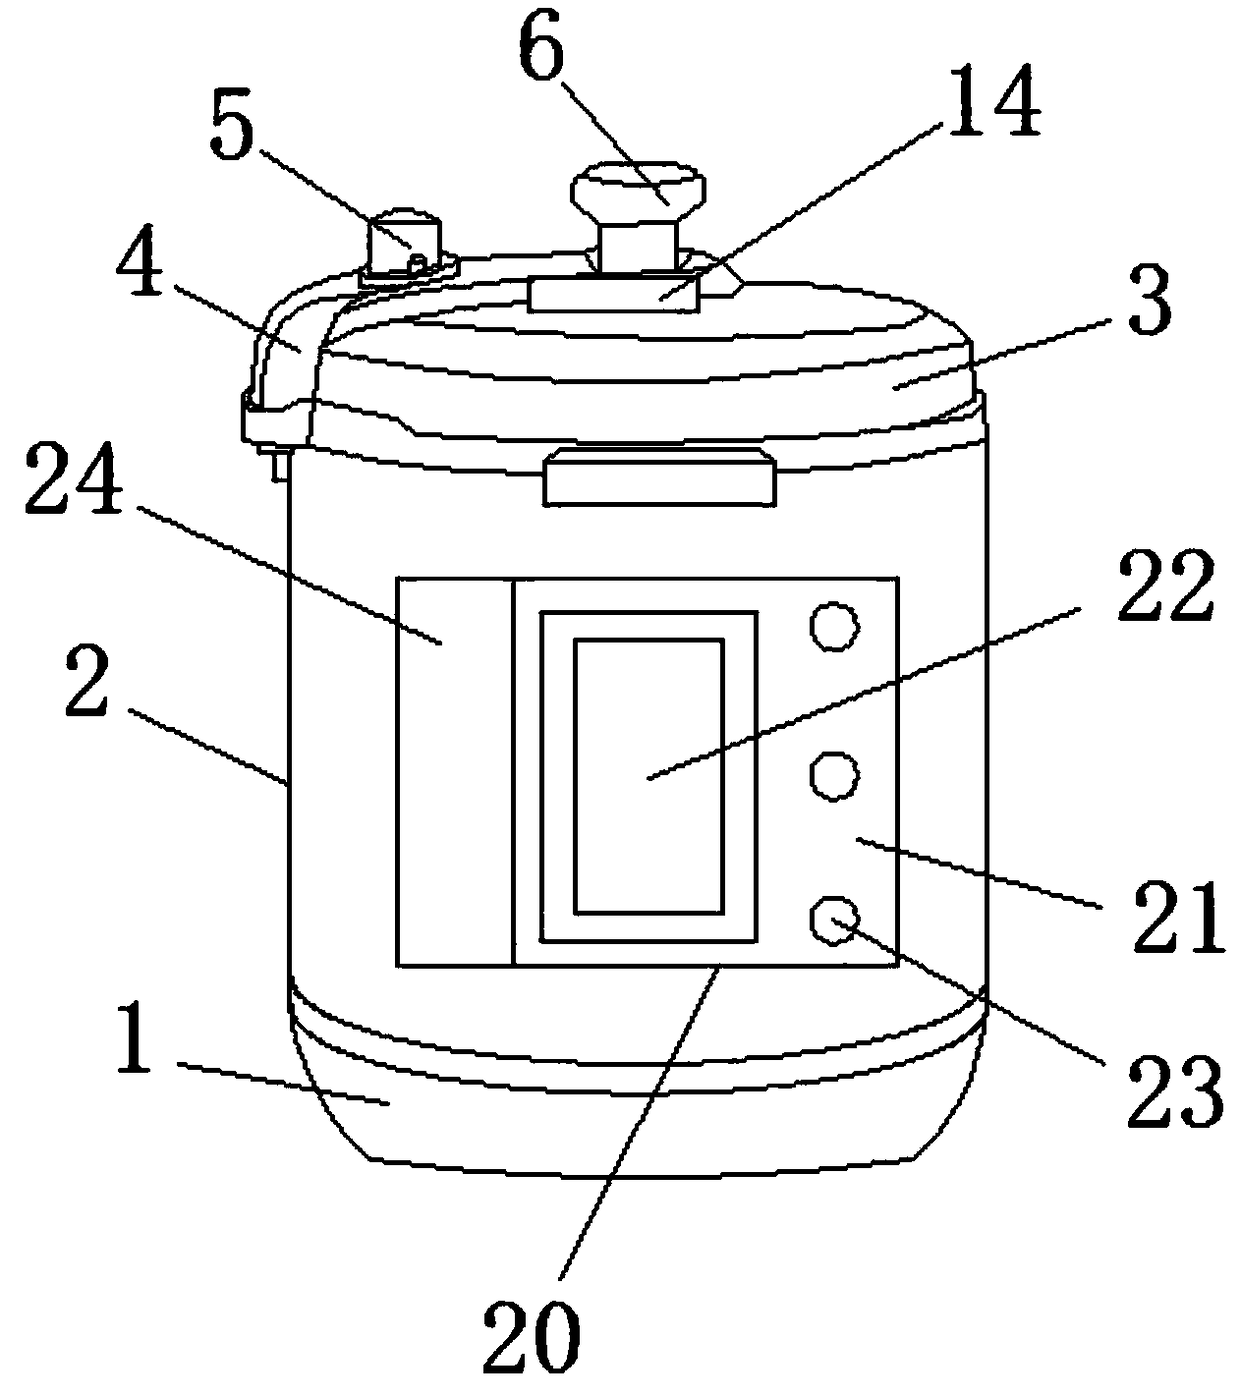 Electric pressure cooker with adjustable pressure limiting value